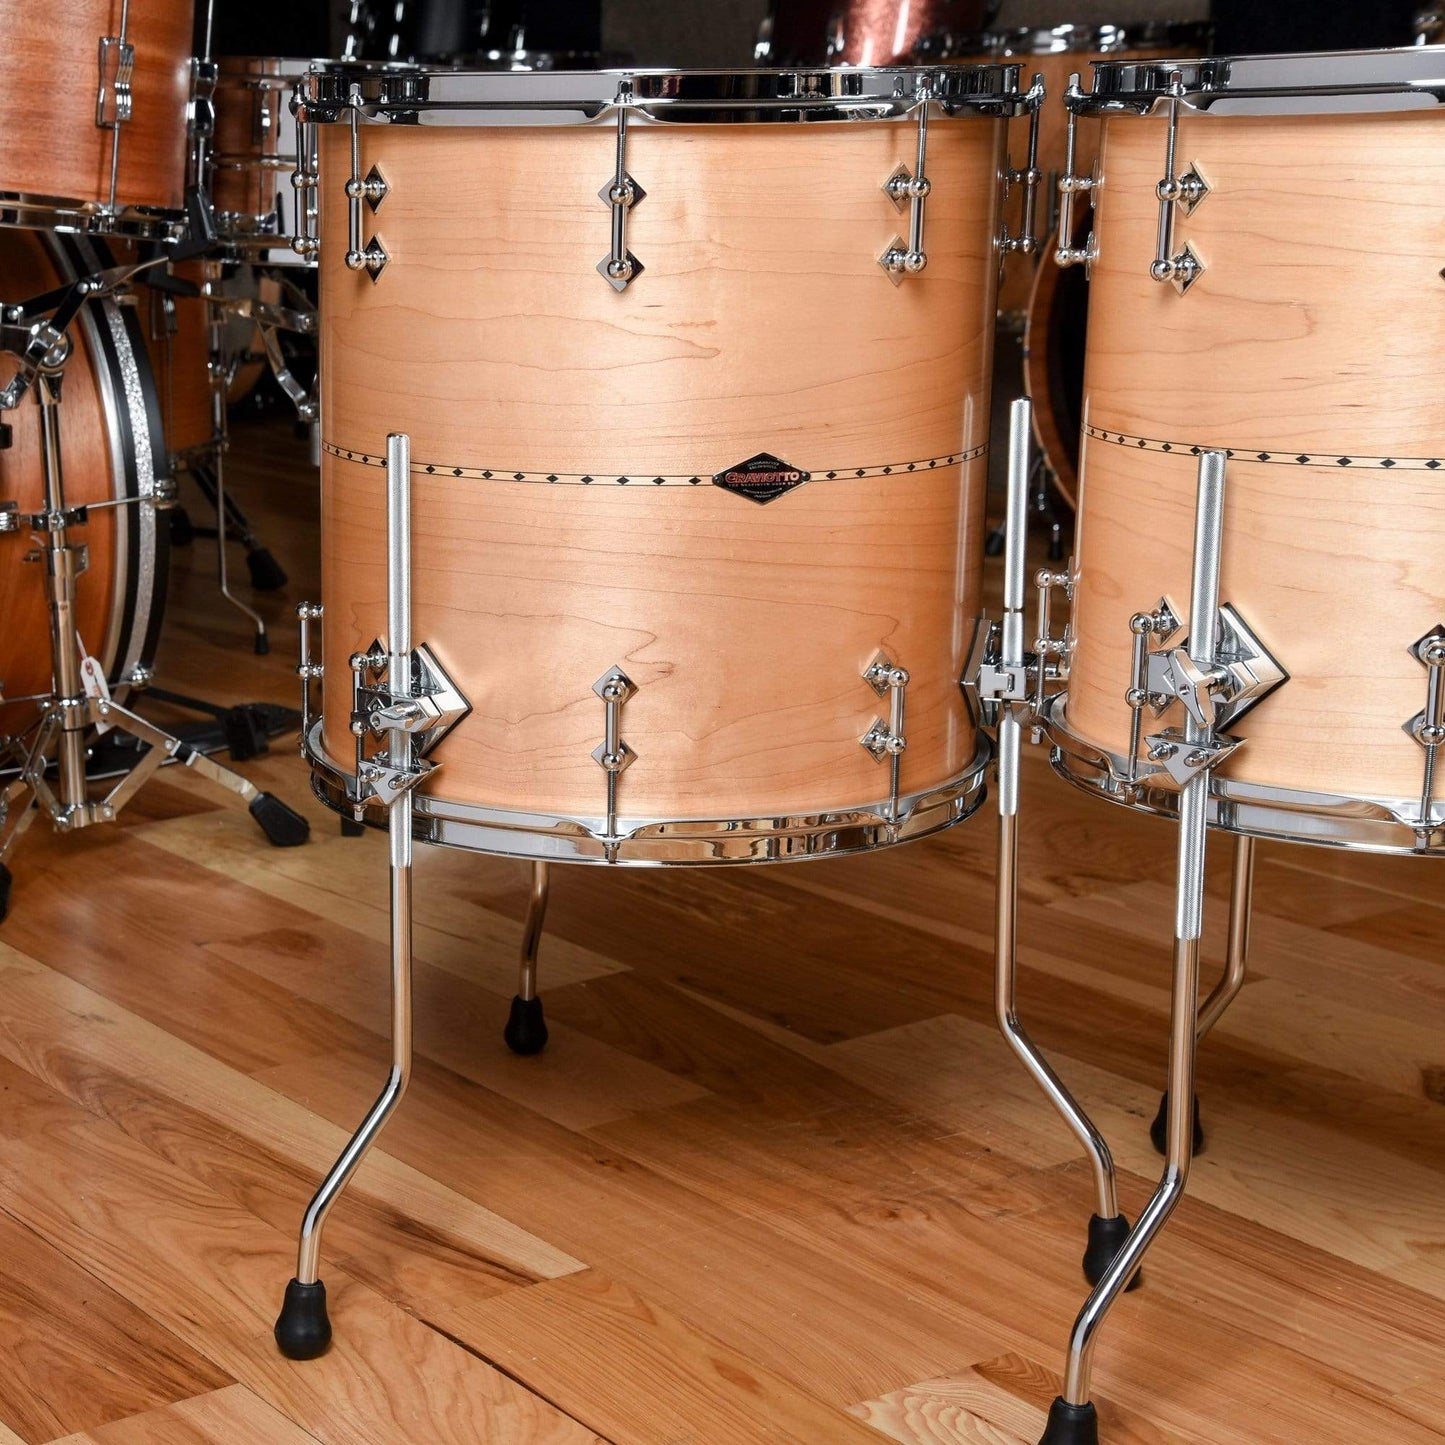 Craviotto 10/12/14/16/22 5pc. Drum Kit Solid Shell Maple w/Maple Inlay Drums and Percussion / Acoustic Drums / Full Acoustic Kits